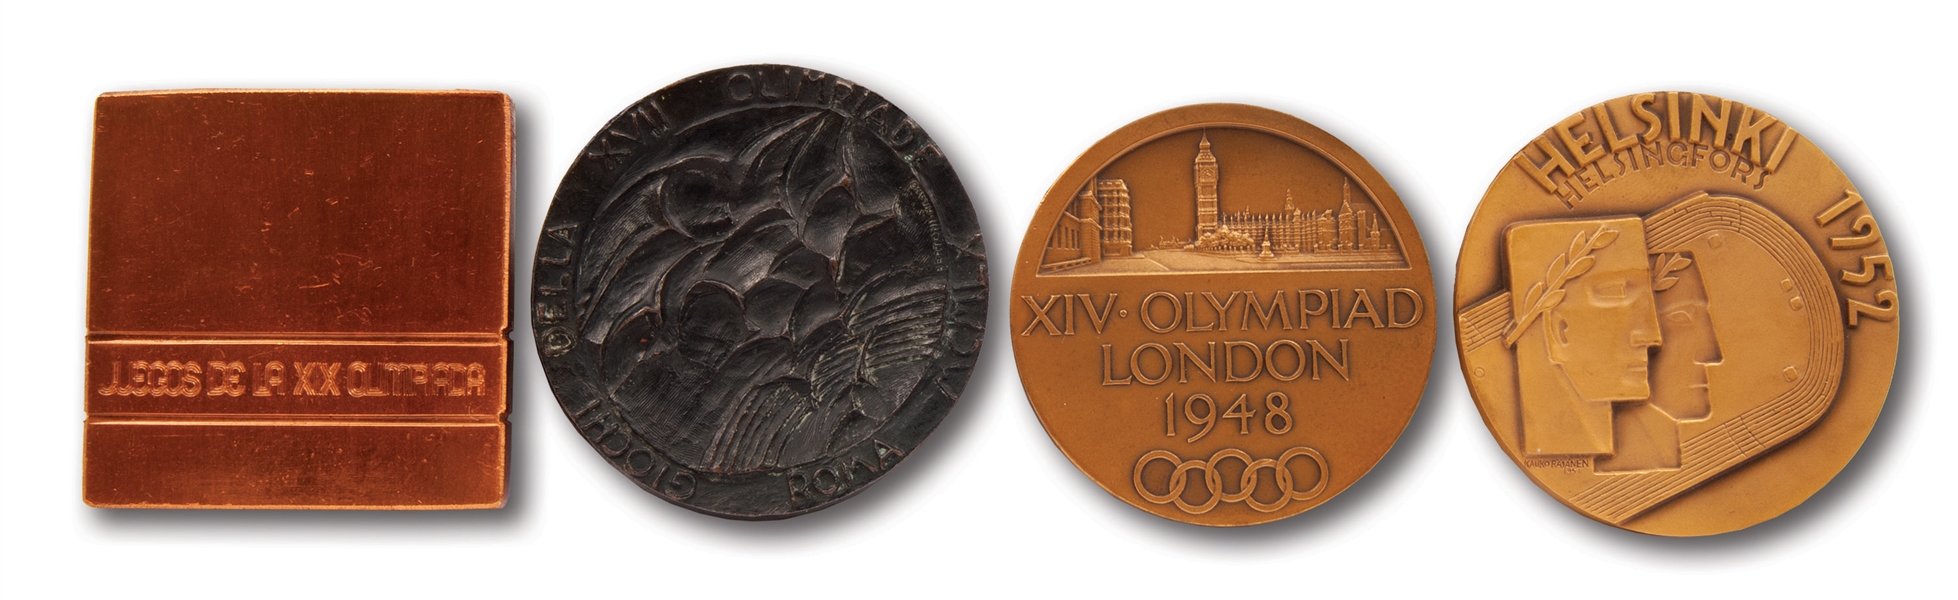 LOT OF (4) SUMMER OLYMPICS PARTICIPATION MEDALS: 1948 LONDON, 1952 HELSINKI, 1960 ROME & 1968 MEXICO CITY